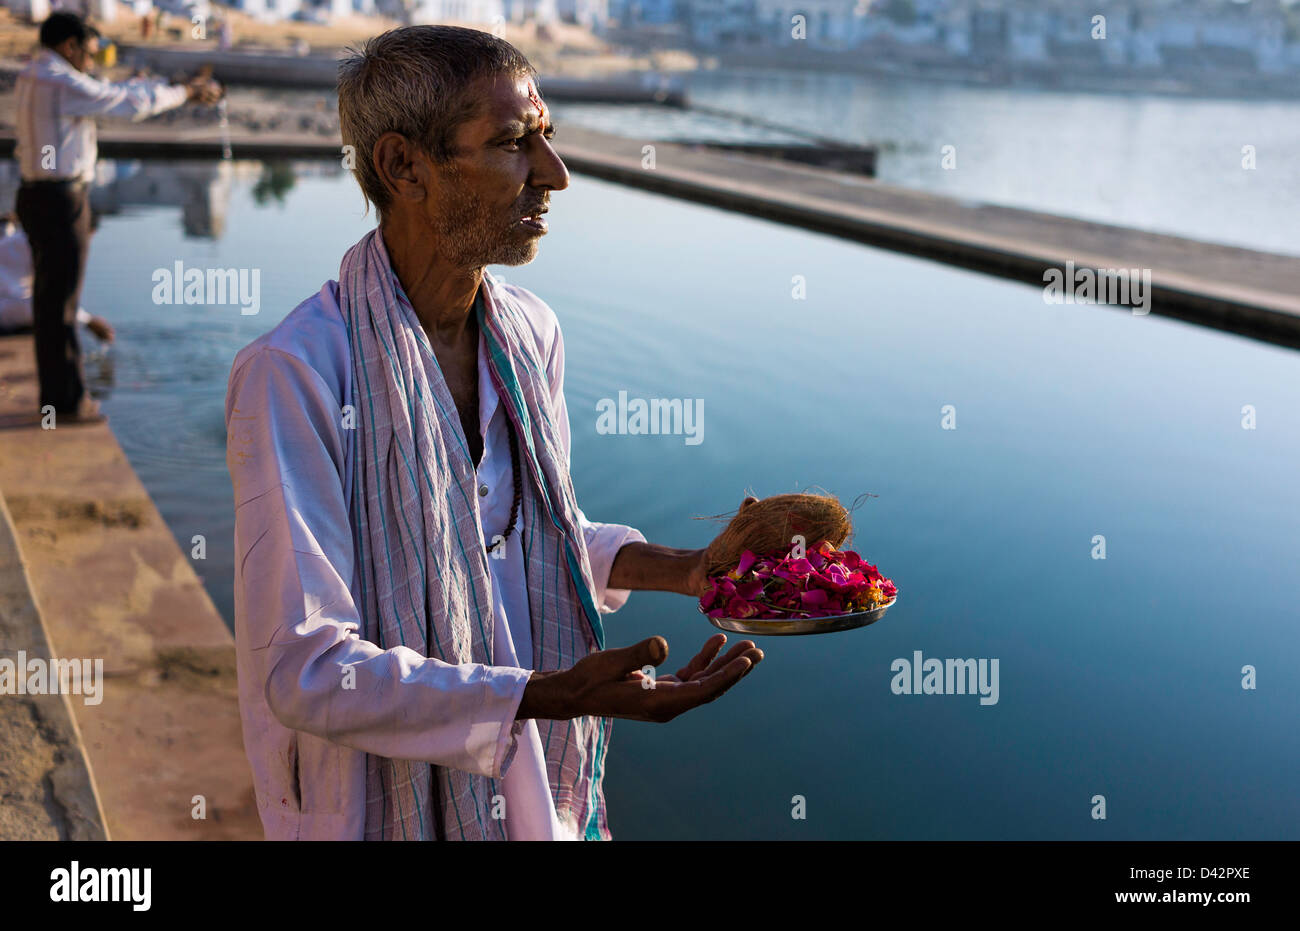 Hindu Brahmin priest offers votive offerings and prayers to the Sun God at the holy lake in Pushkar, Rajasthan, India. Stock Photo